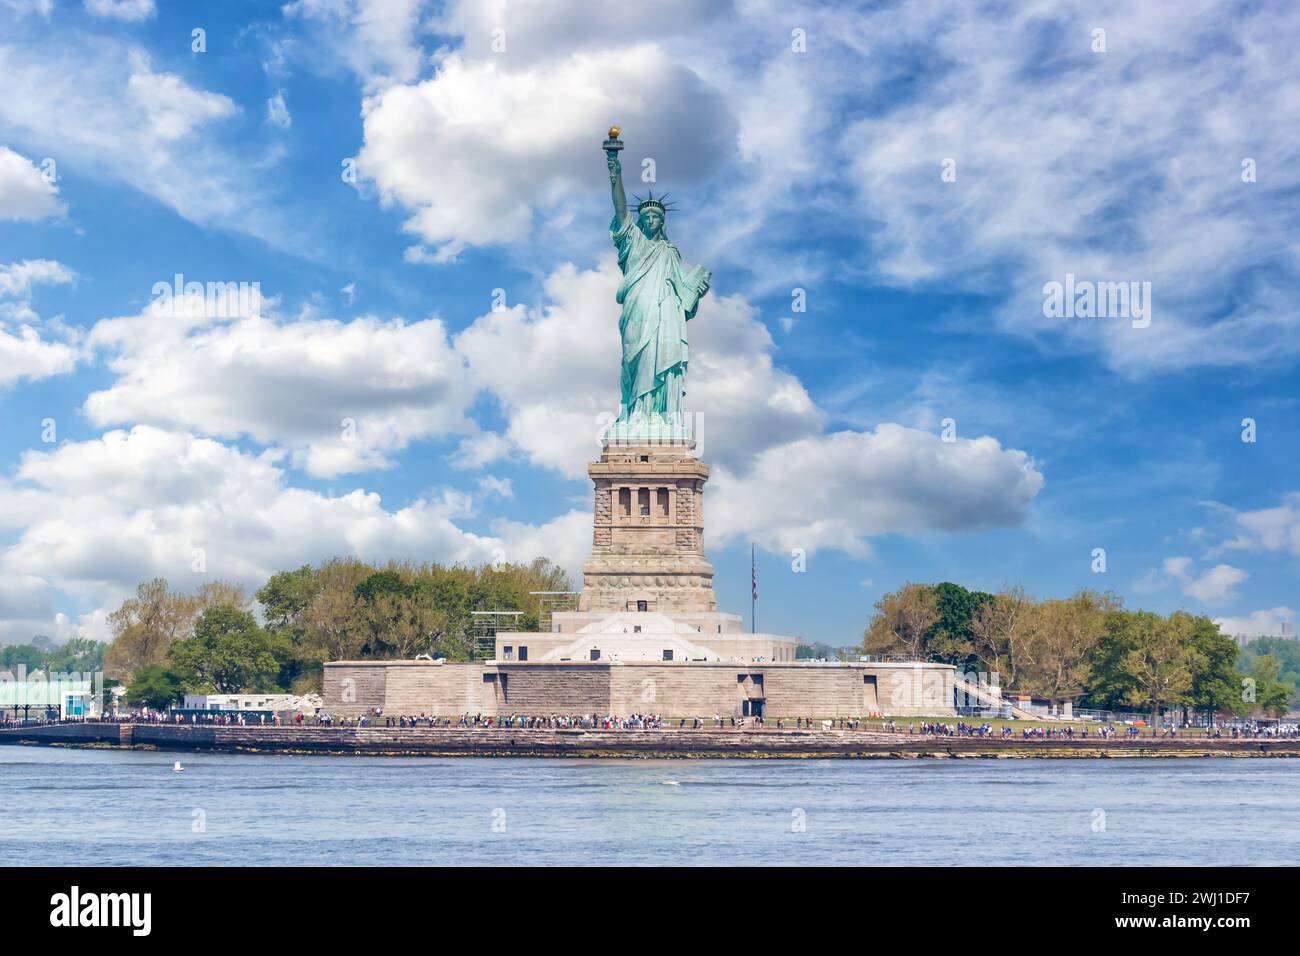 New York City Statue of Liberty in the USA Stock Photo